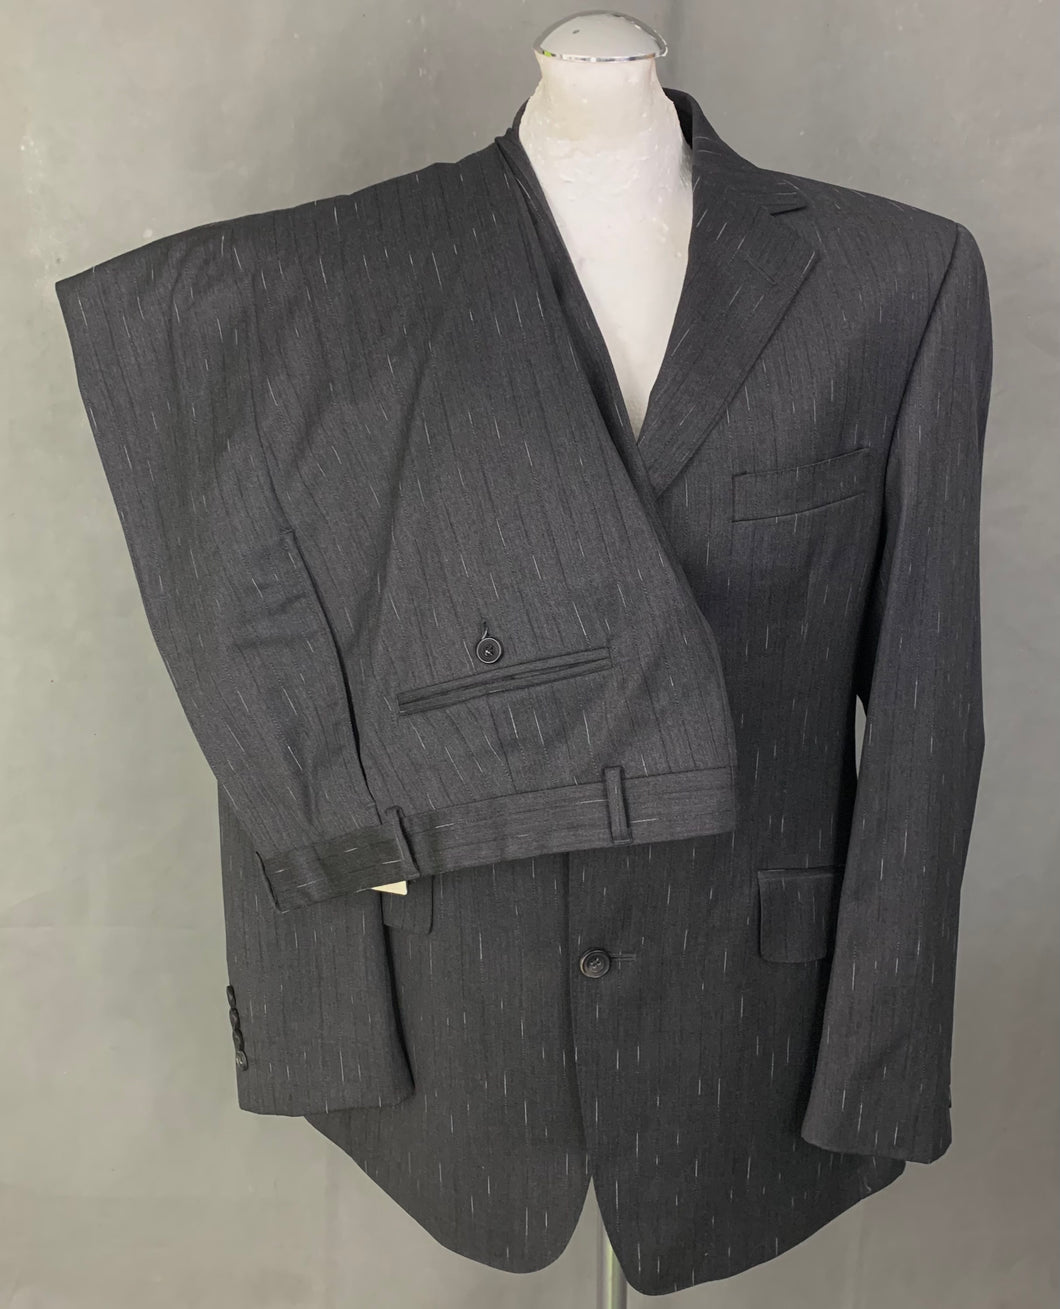 AQUASCUTUM Awesome Grey 2 PIECE SUIT Size 40R - 40